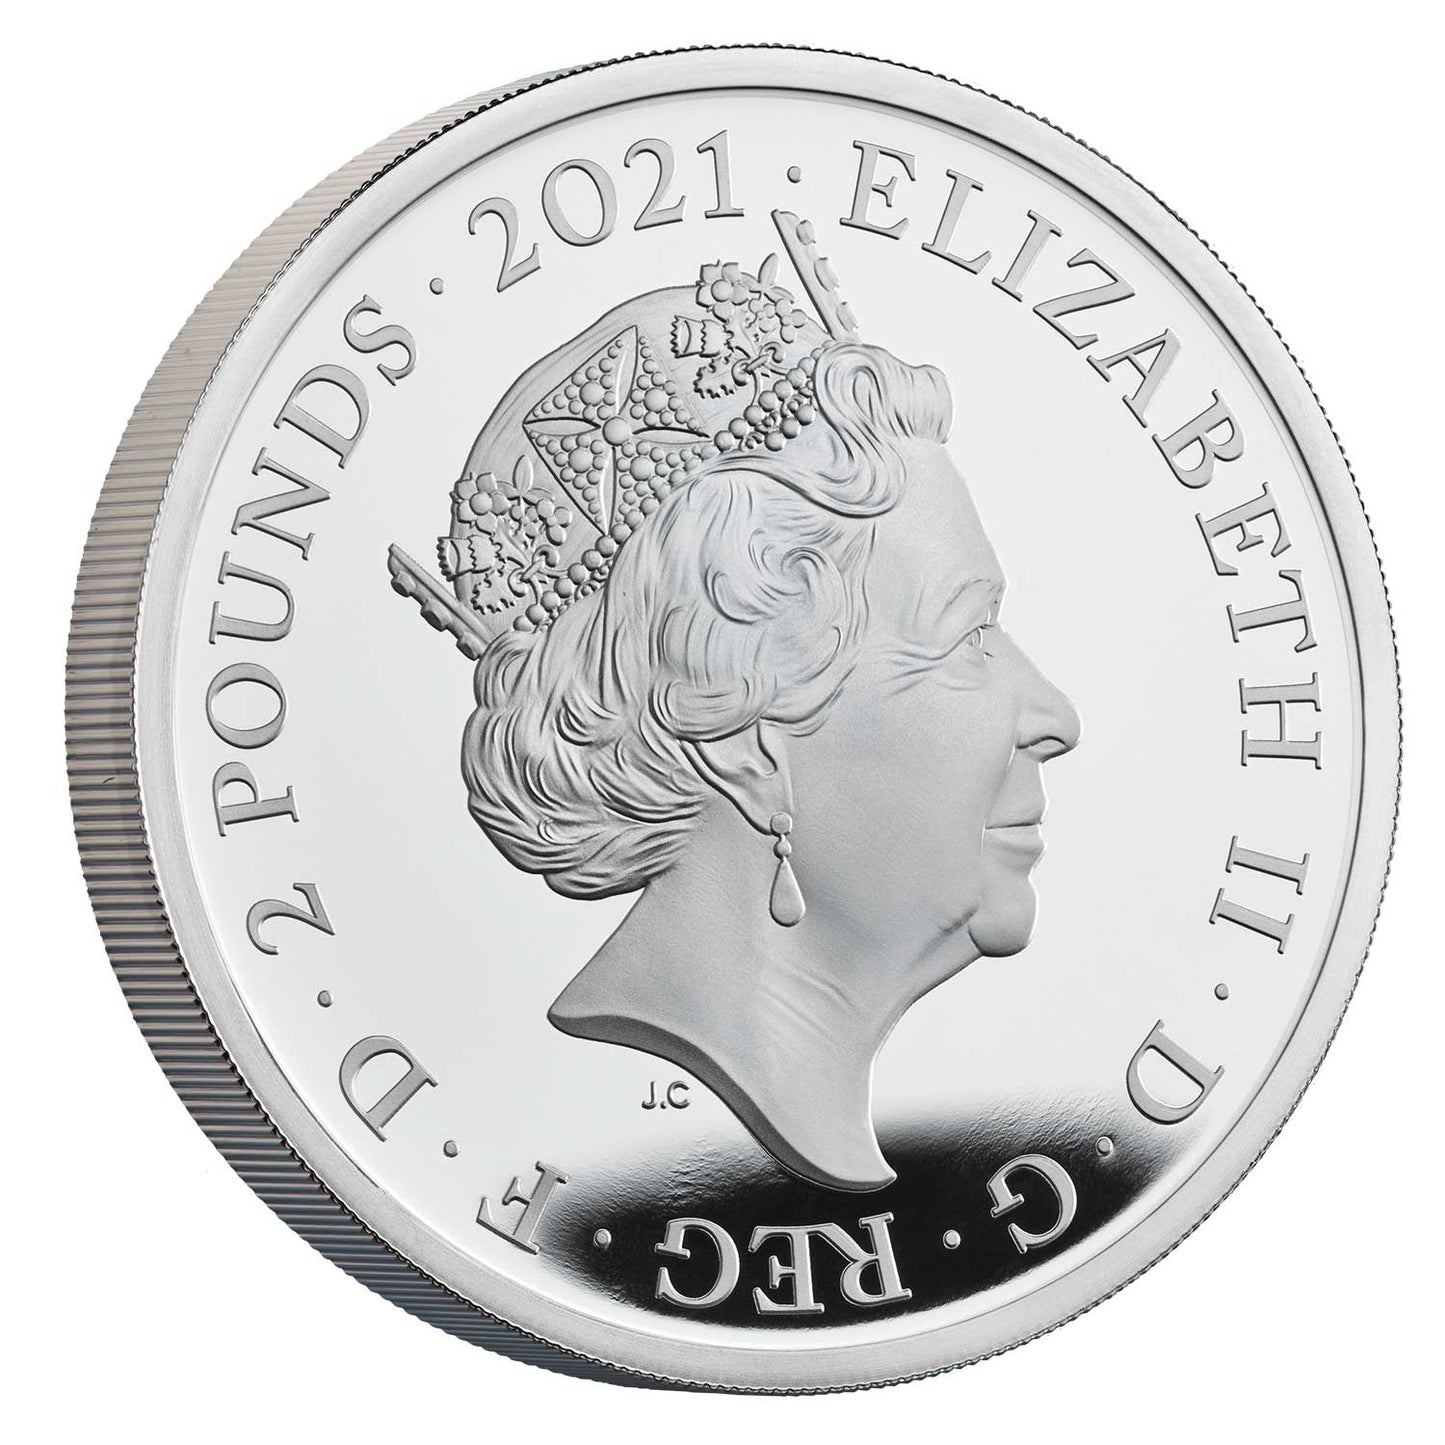 Royal Celebration Two-Coin Set: 95th Birthday of Her Majesty Queen Elizabeth II (2021)